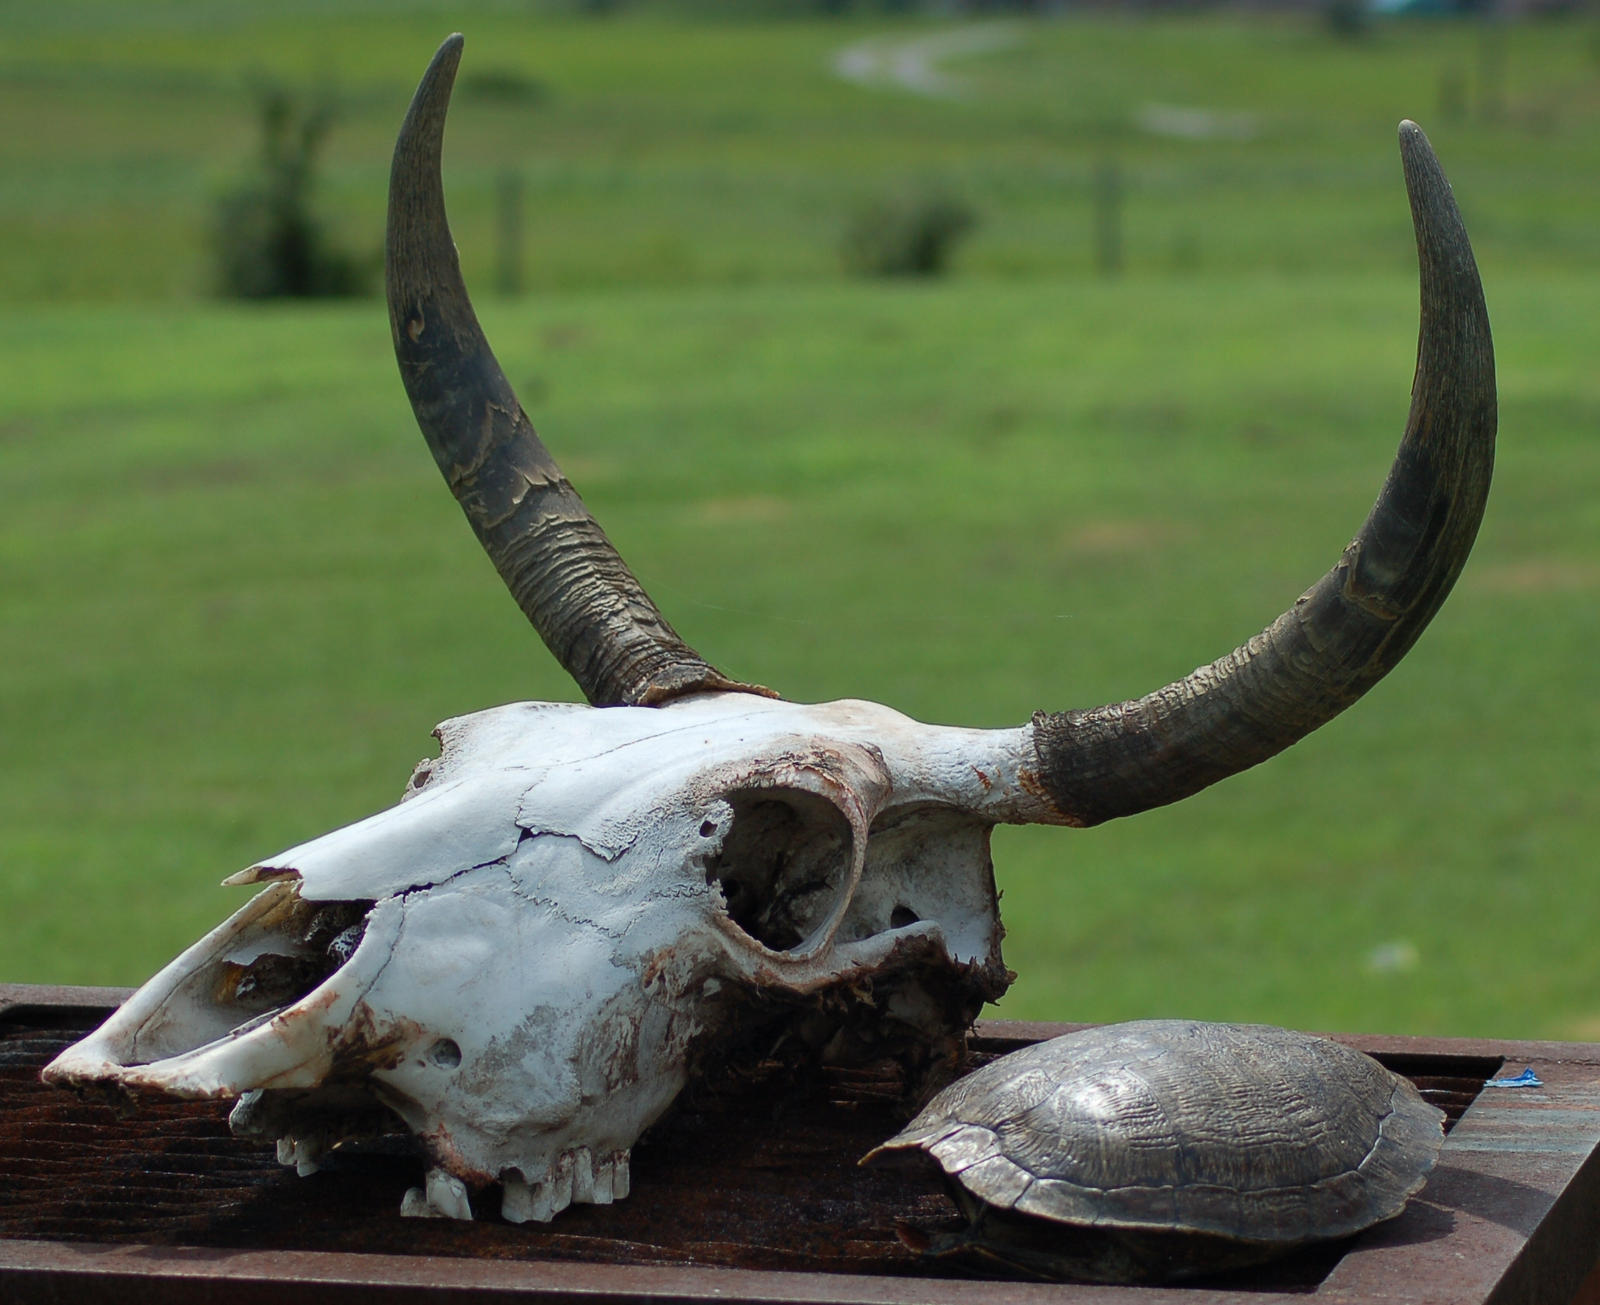 Cow Skull With Turtle Shell